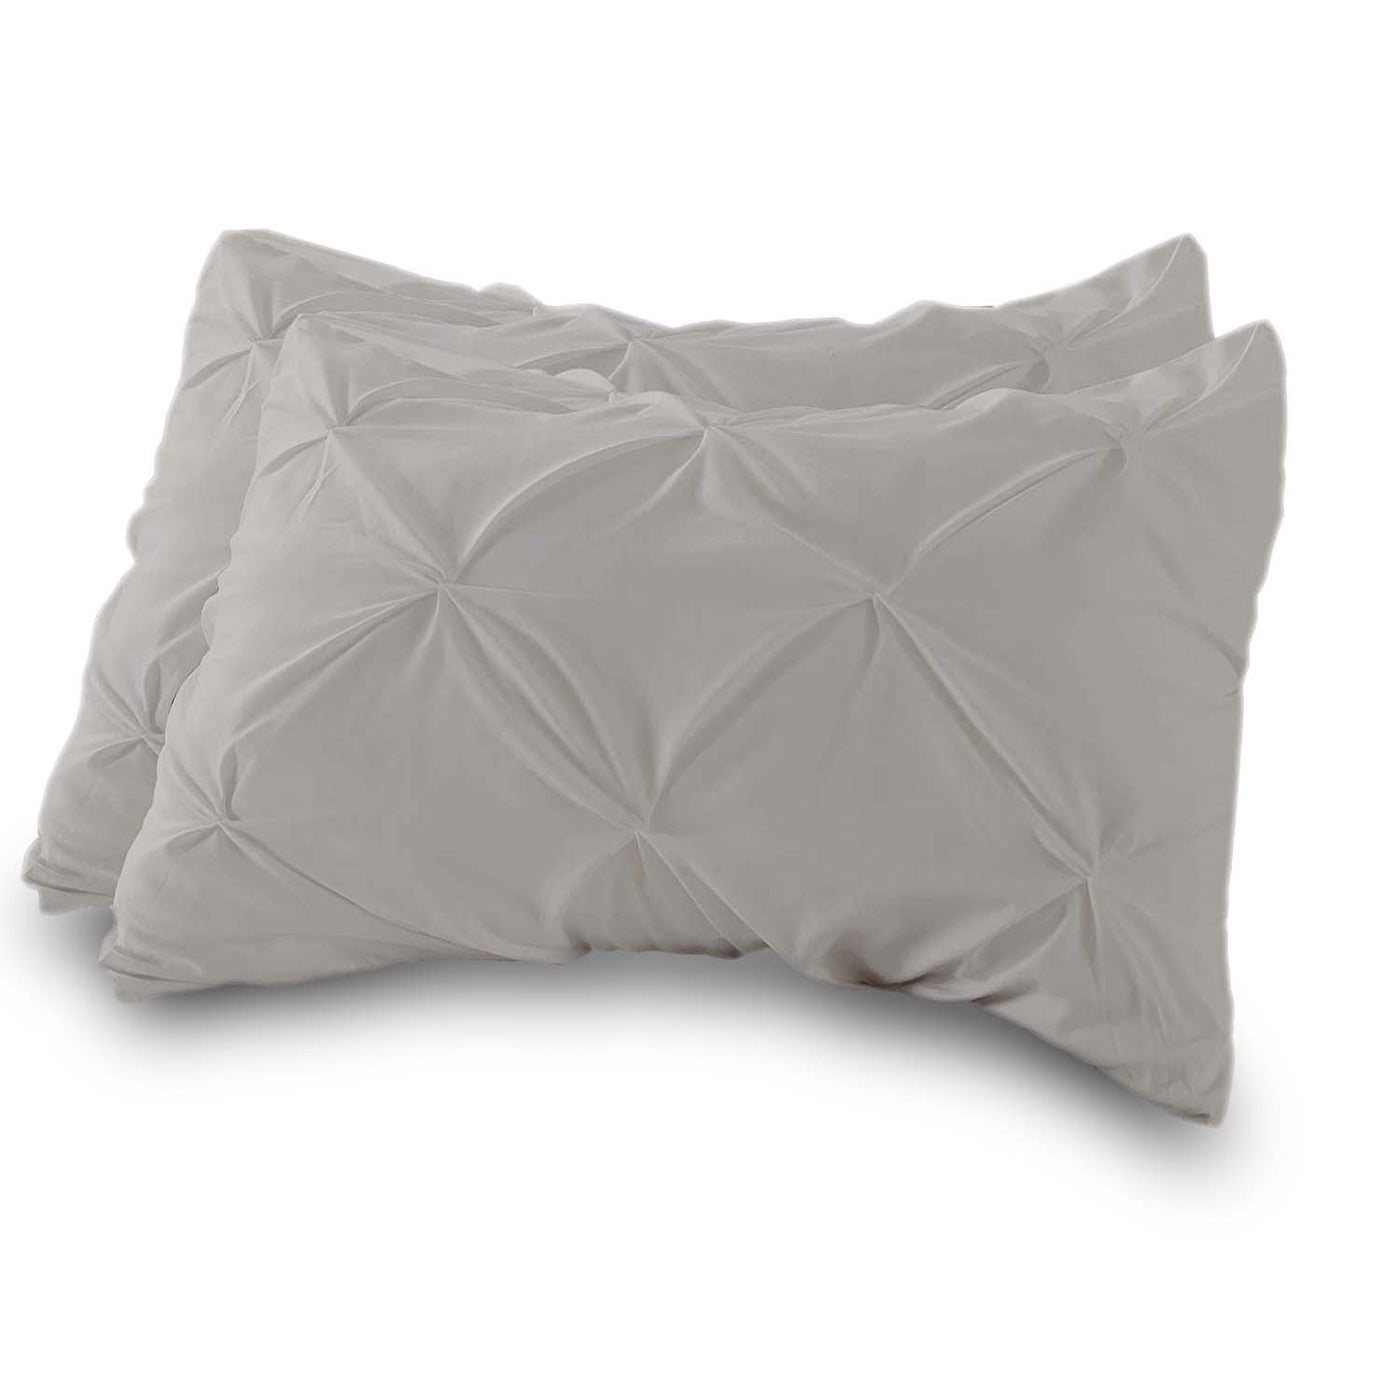 Set of 2 Pinch Pleated Pillow Shams 100% Egyptian Cotton 600 Thread Count